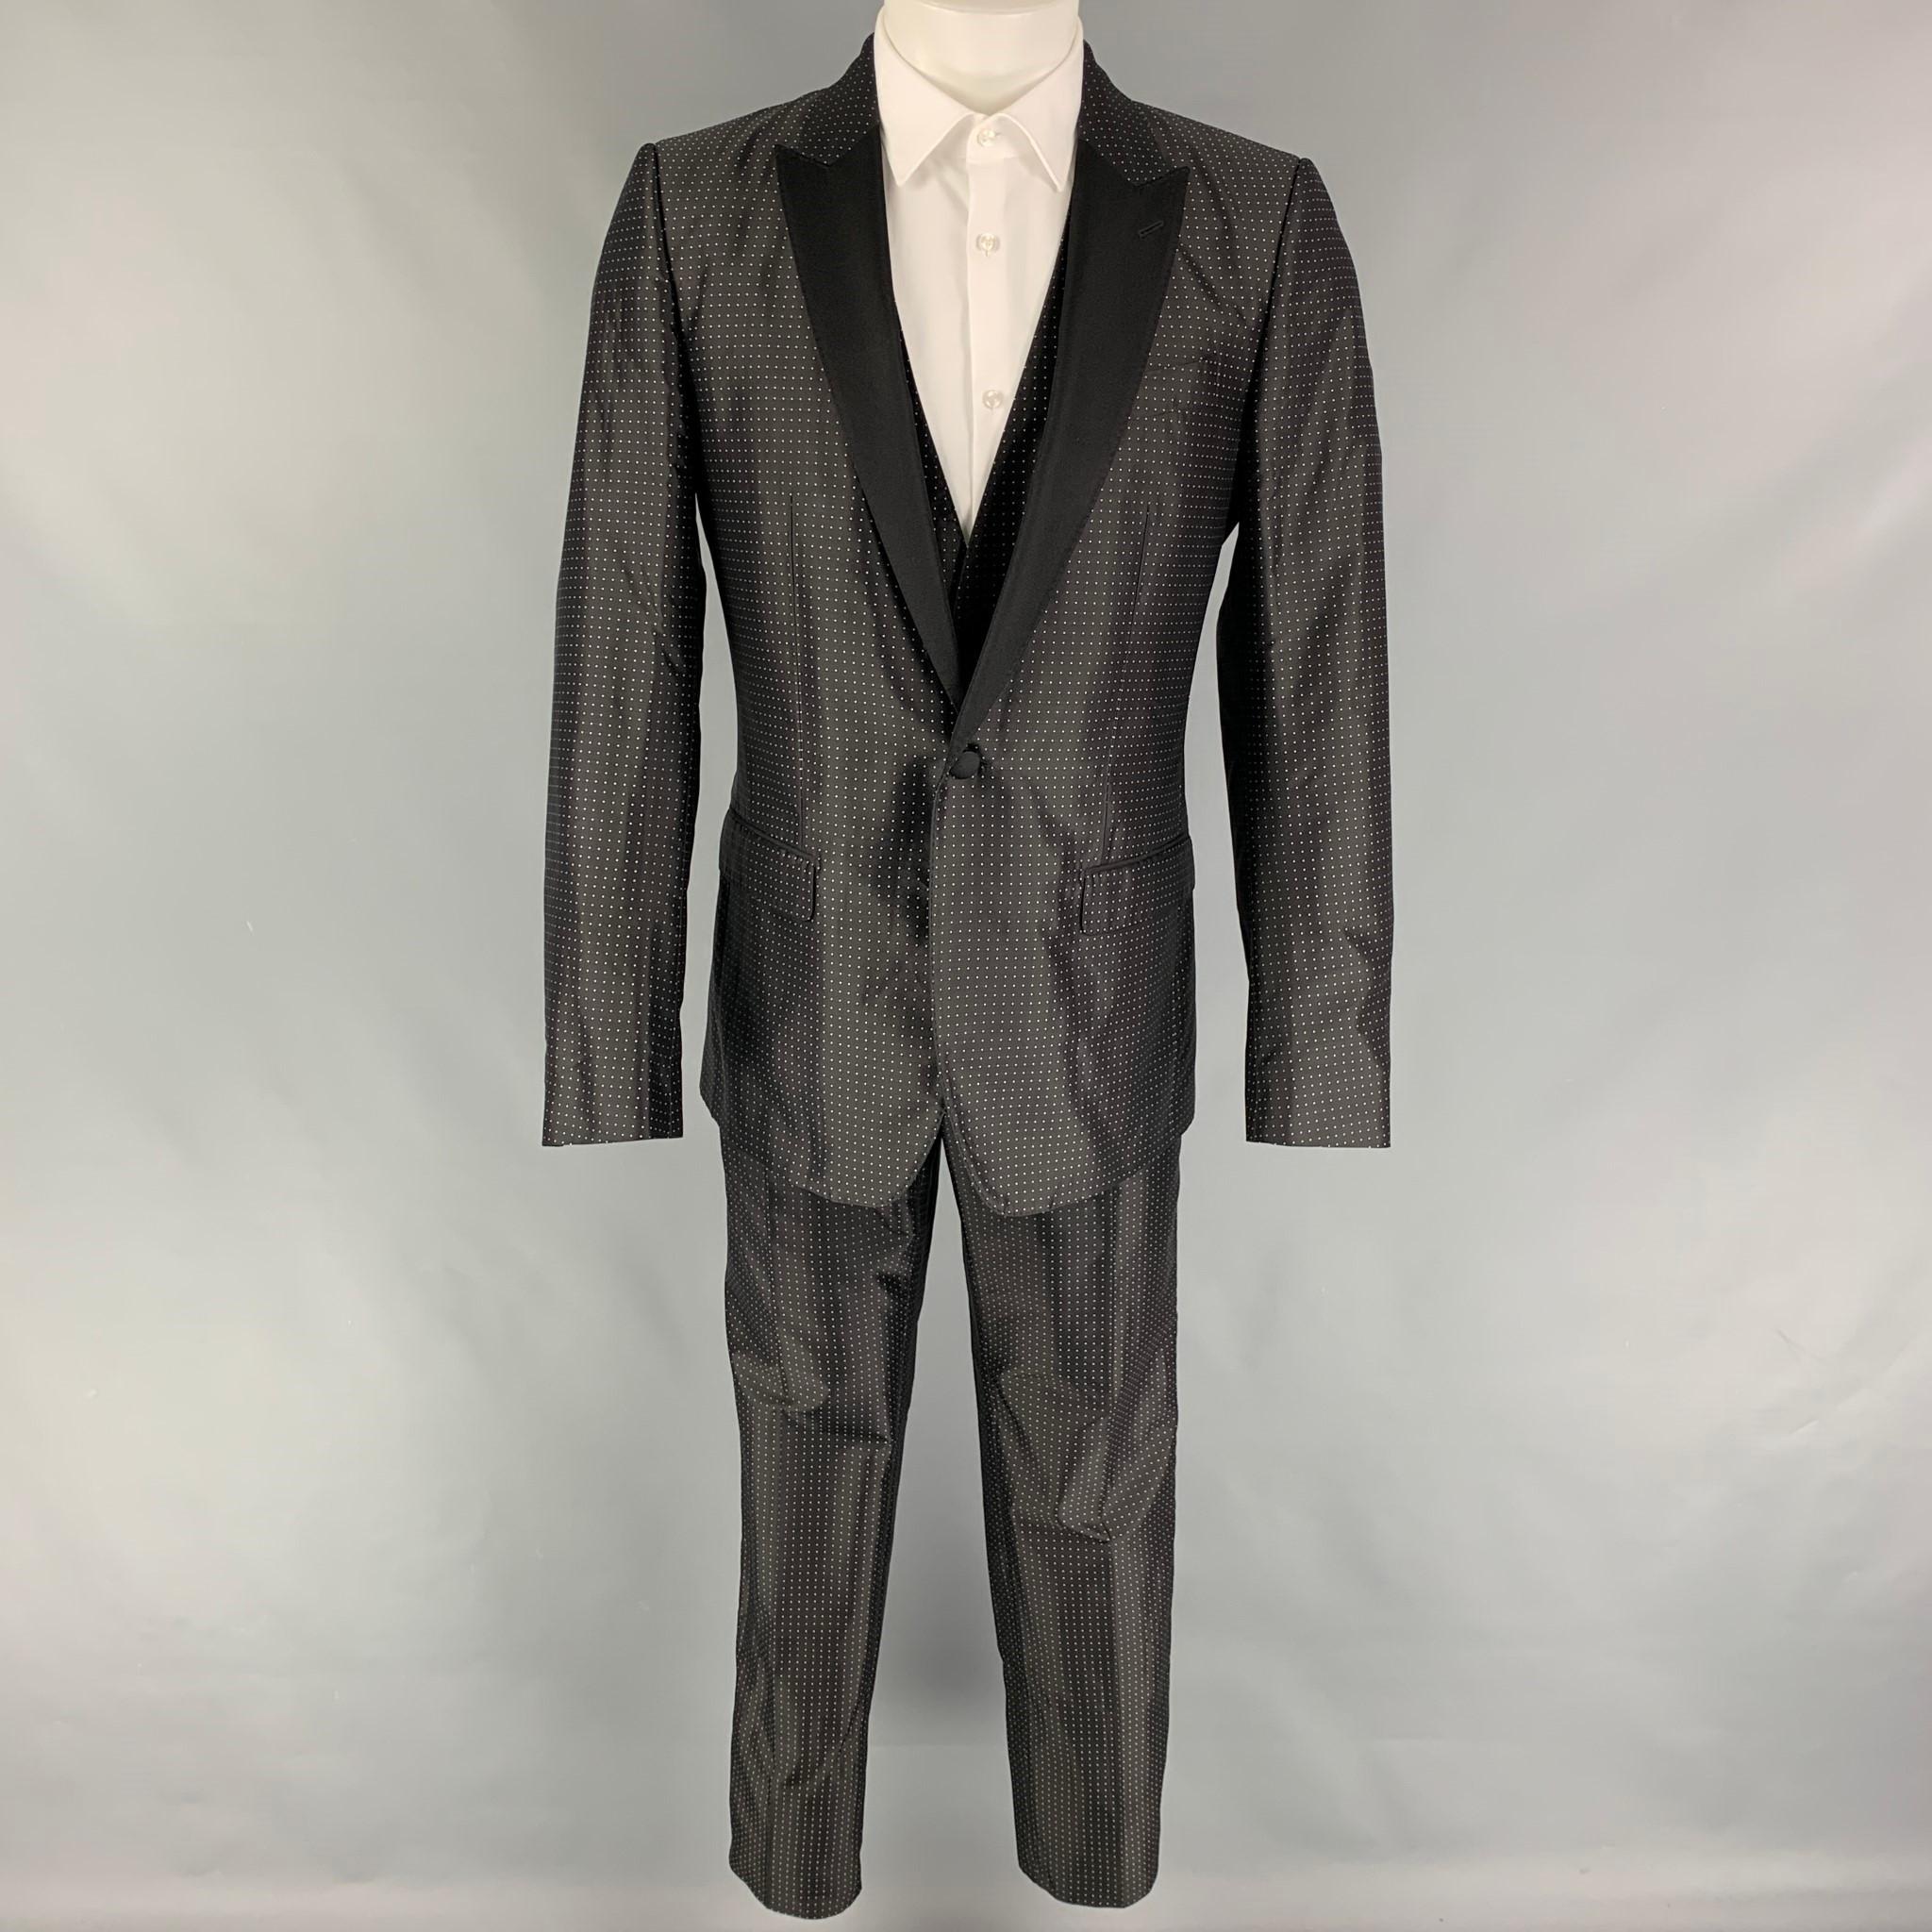 DOLCE & GABBANA 'Martini' 3 Piece suit comes in a black & white dot print silk / polyester with a full liner and includes a single breasted, single button sport coat with a peak lapel and a matching vest & flat front trousers. Made in Italy.

New